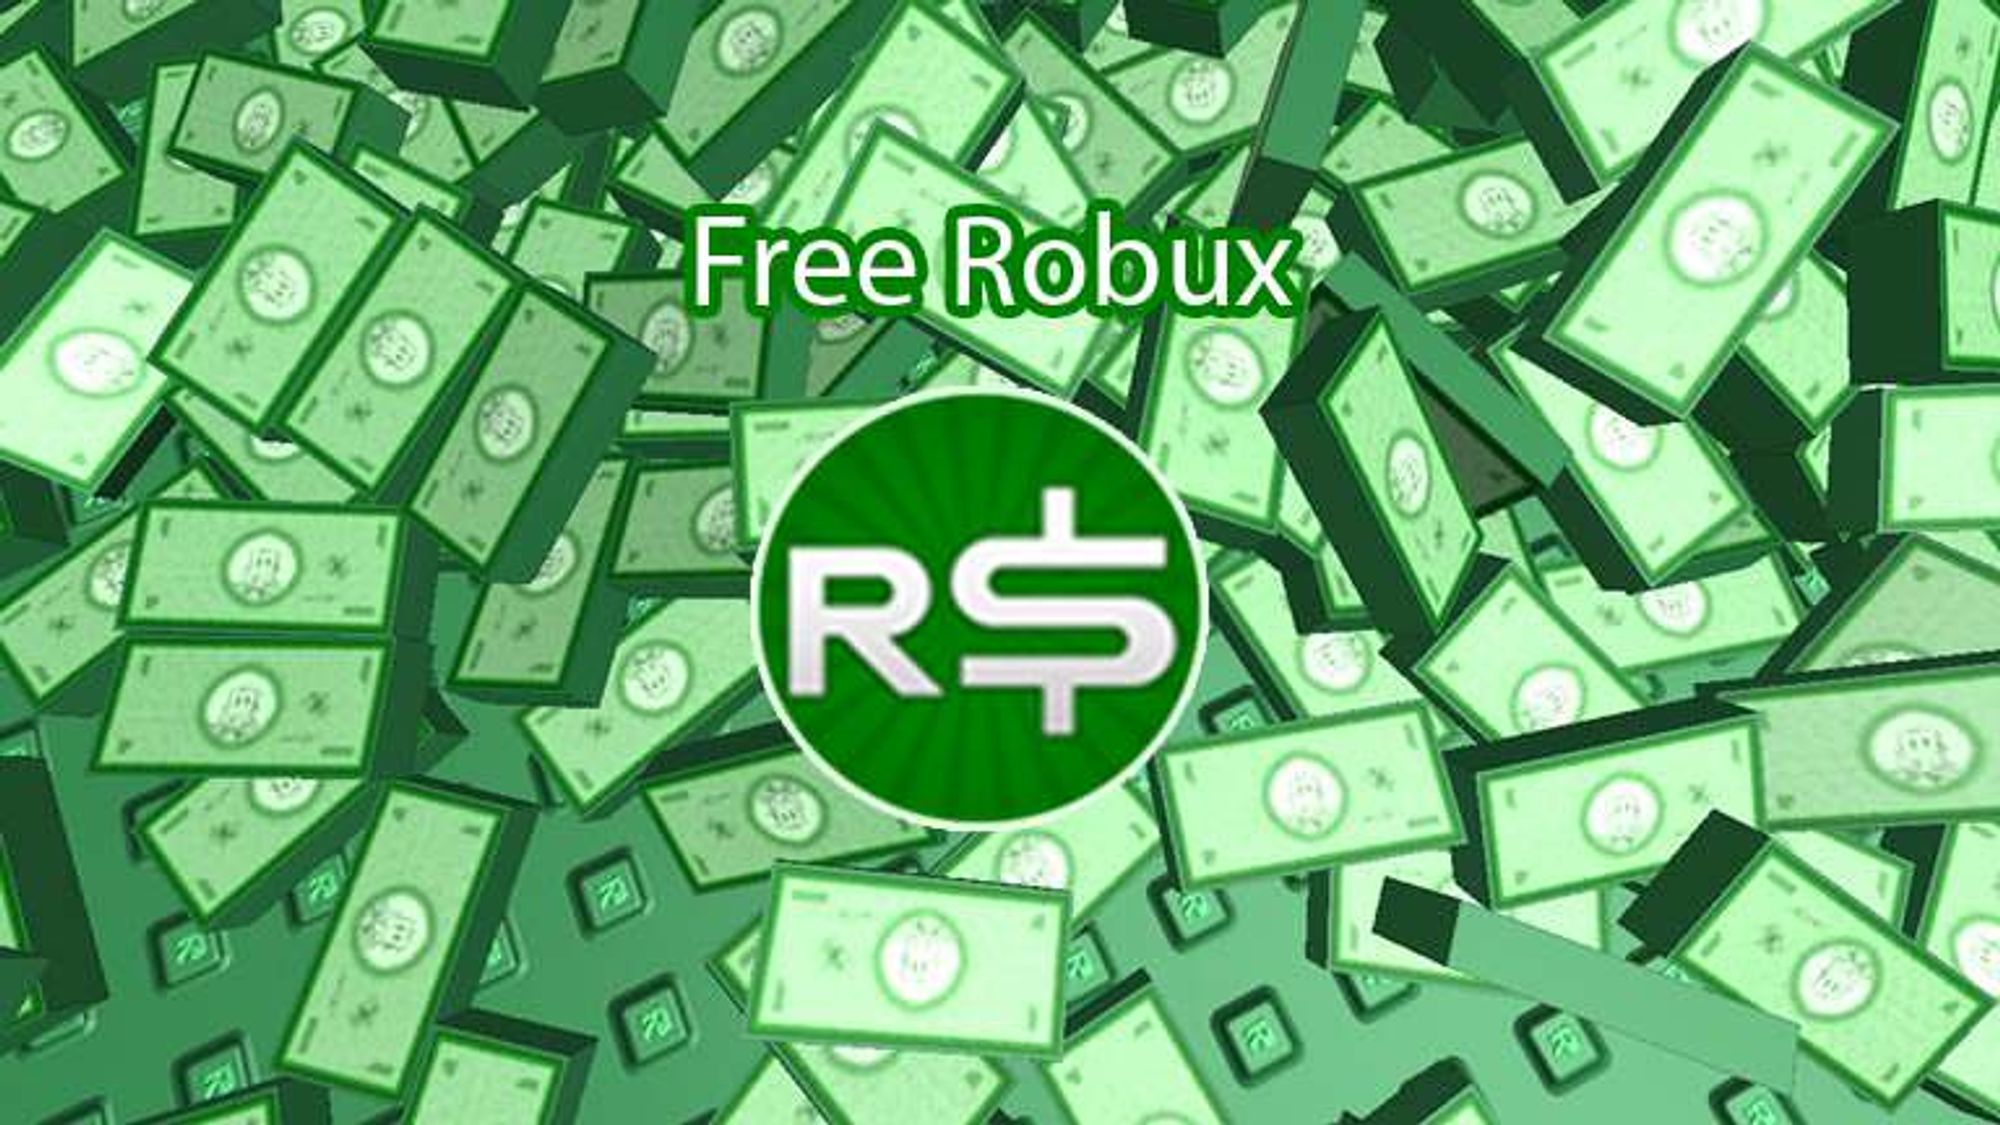 Roblox Robux Hack Free Robux Generator No Human Verification Or Survey - free robux no human verification survey or download 2019 for real